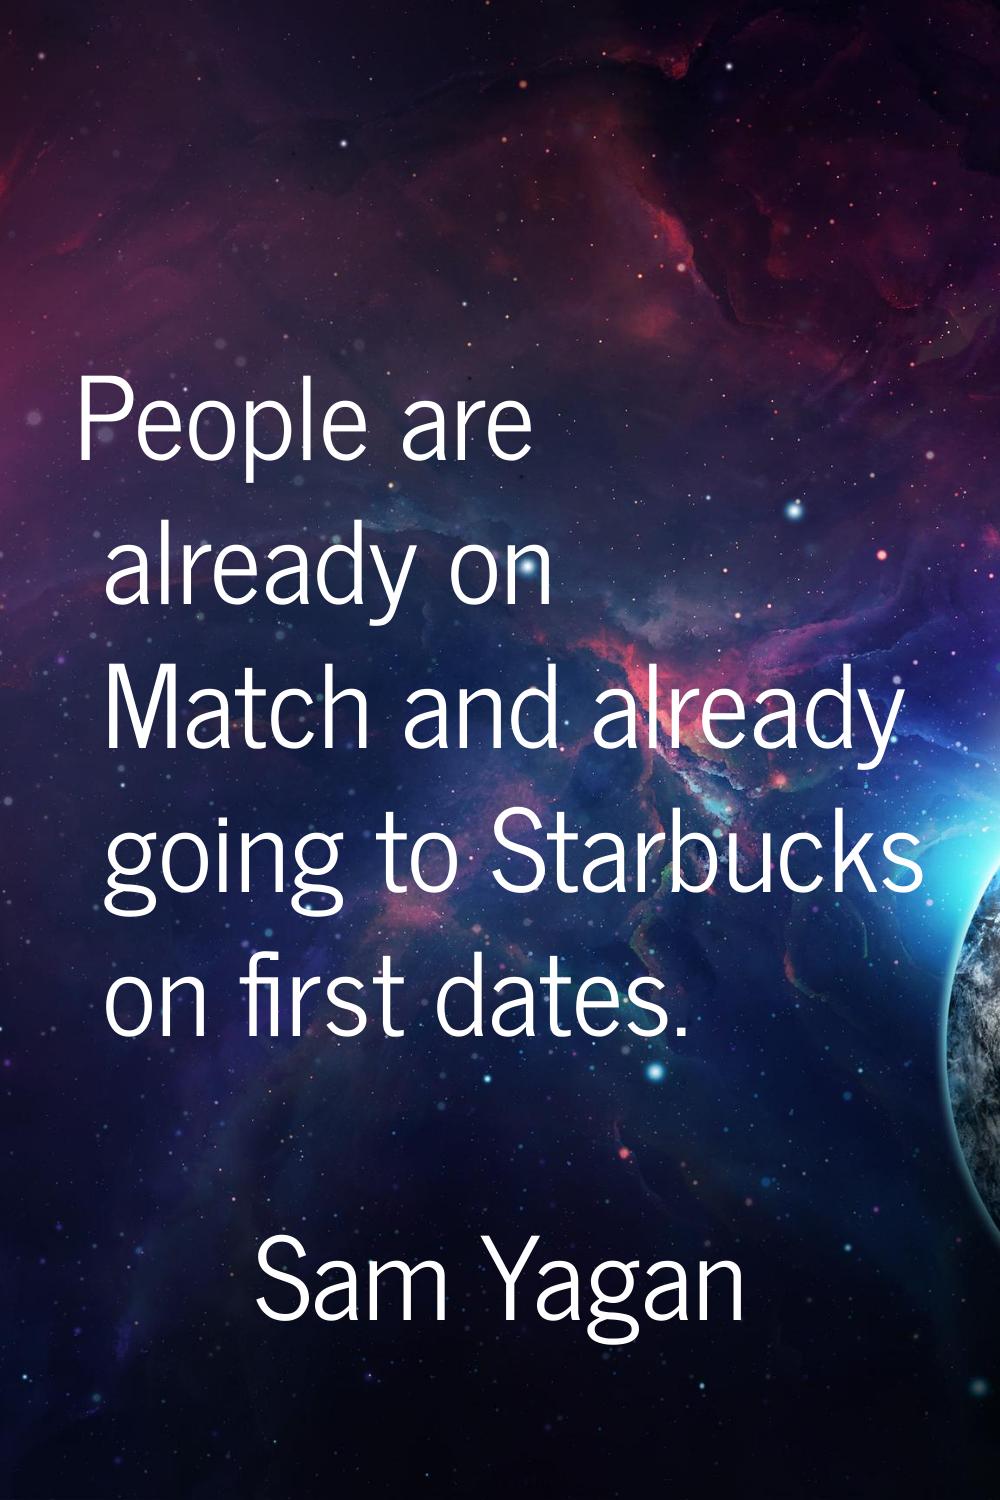 People are already on Match and already going to Starbucks on first dates.